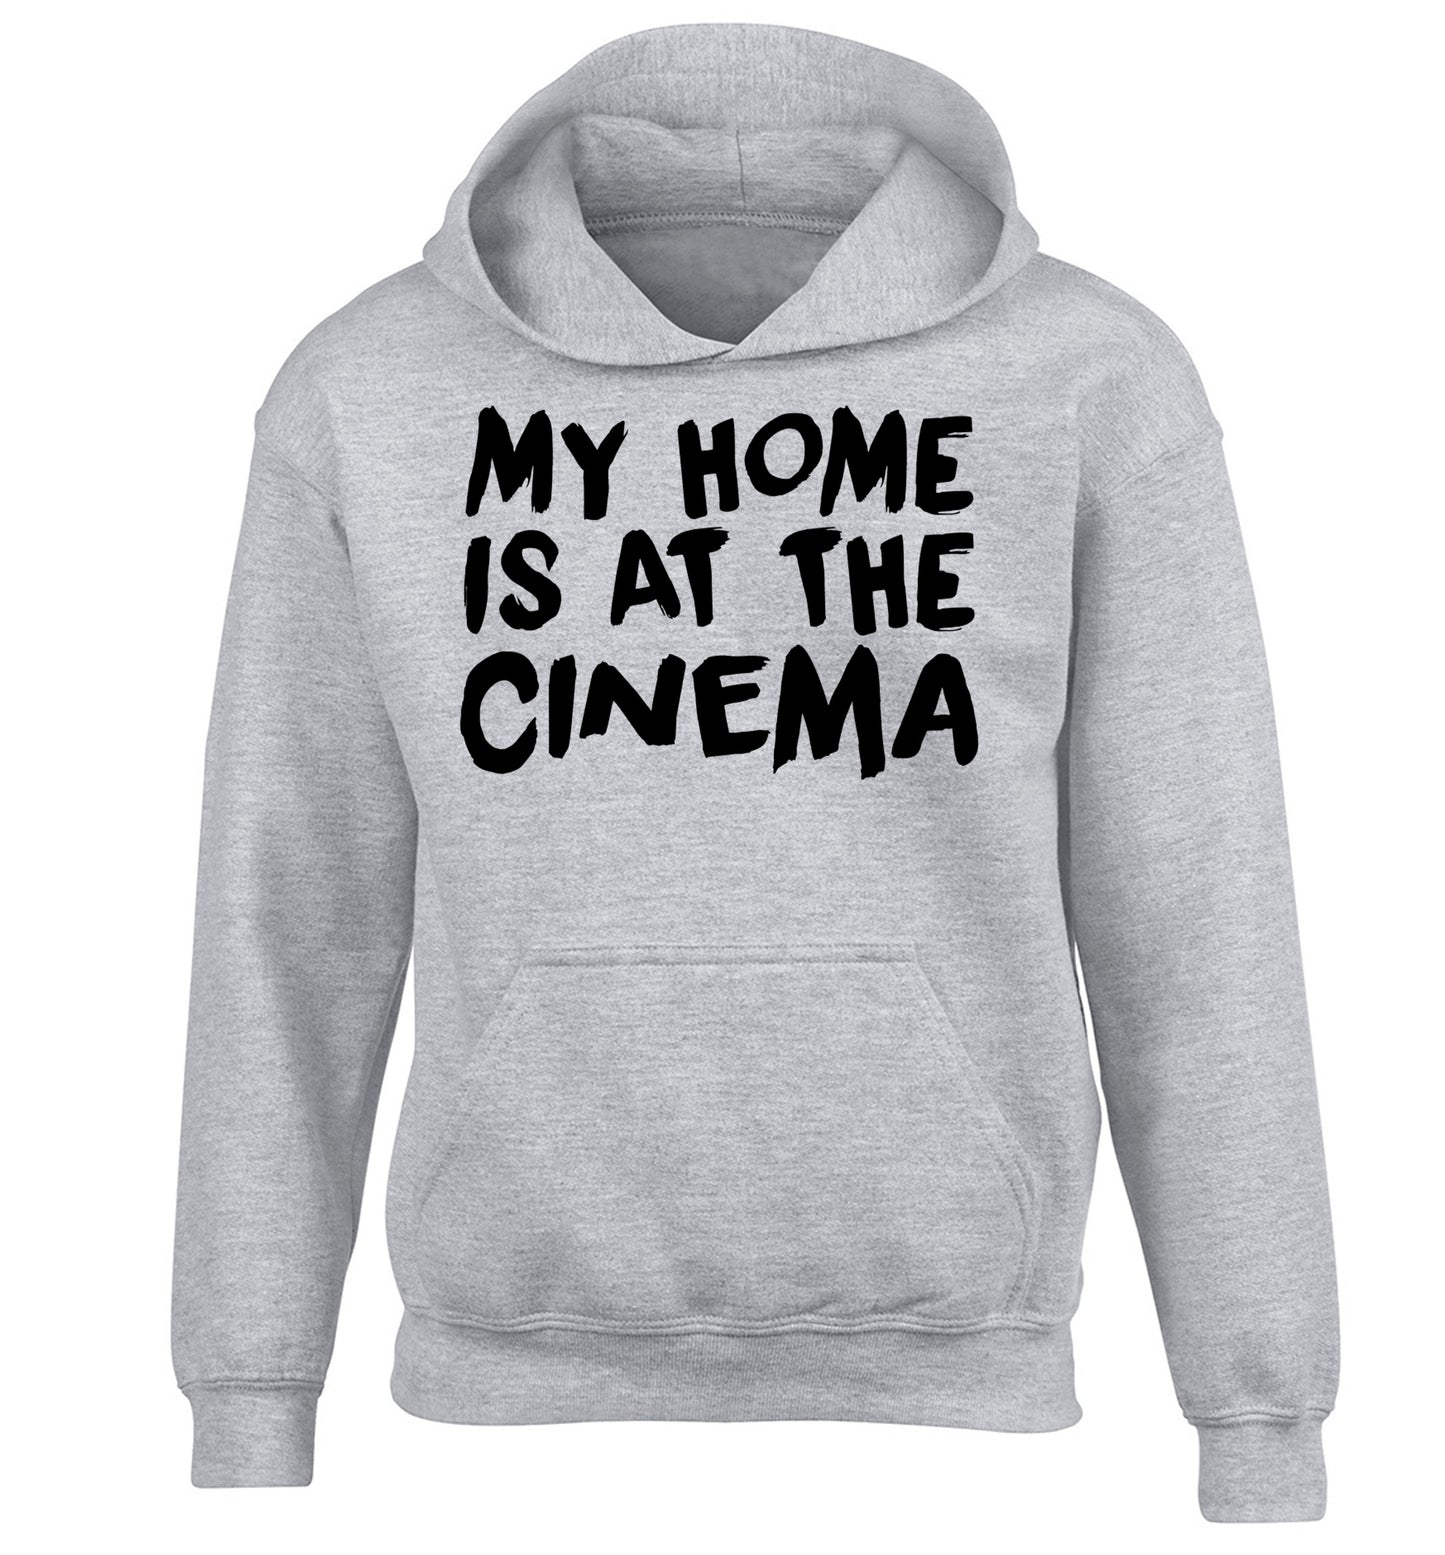 My home is at the cinema children's grey hoodie 12-14 Years